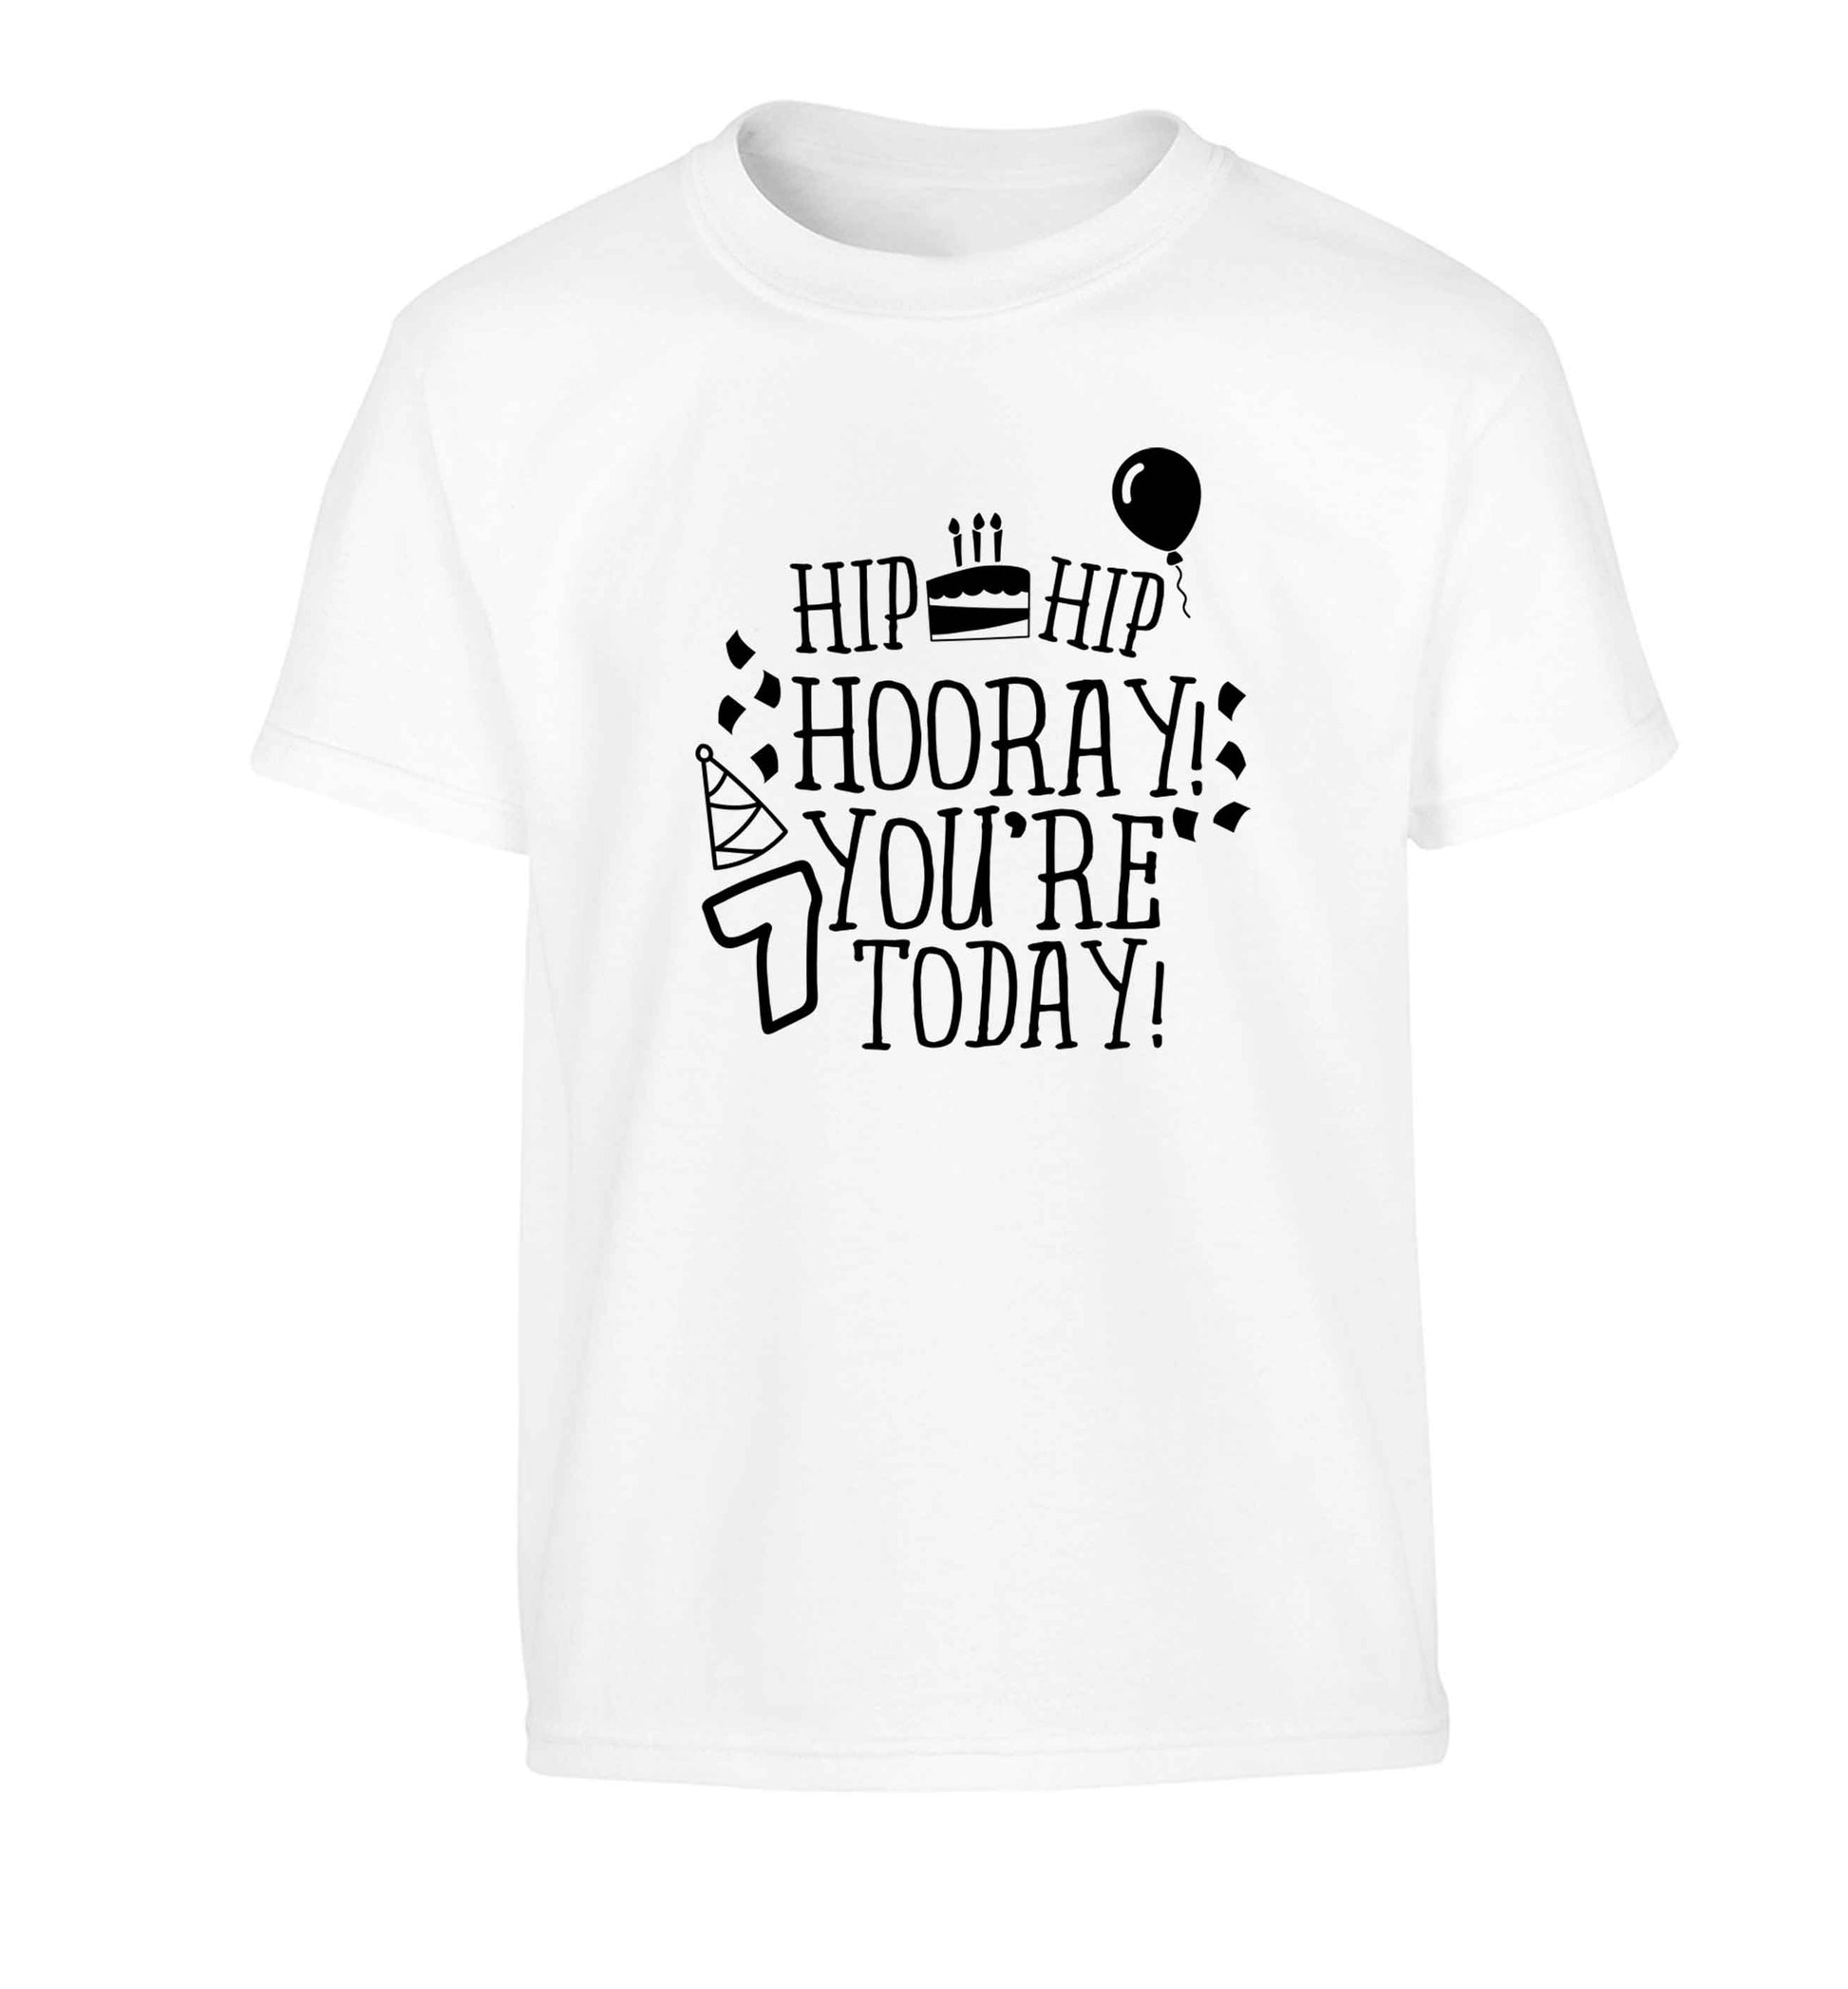 Hip hip hooray you're seven today! Children's white Tshirt 12-13 Years